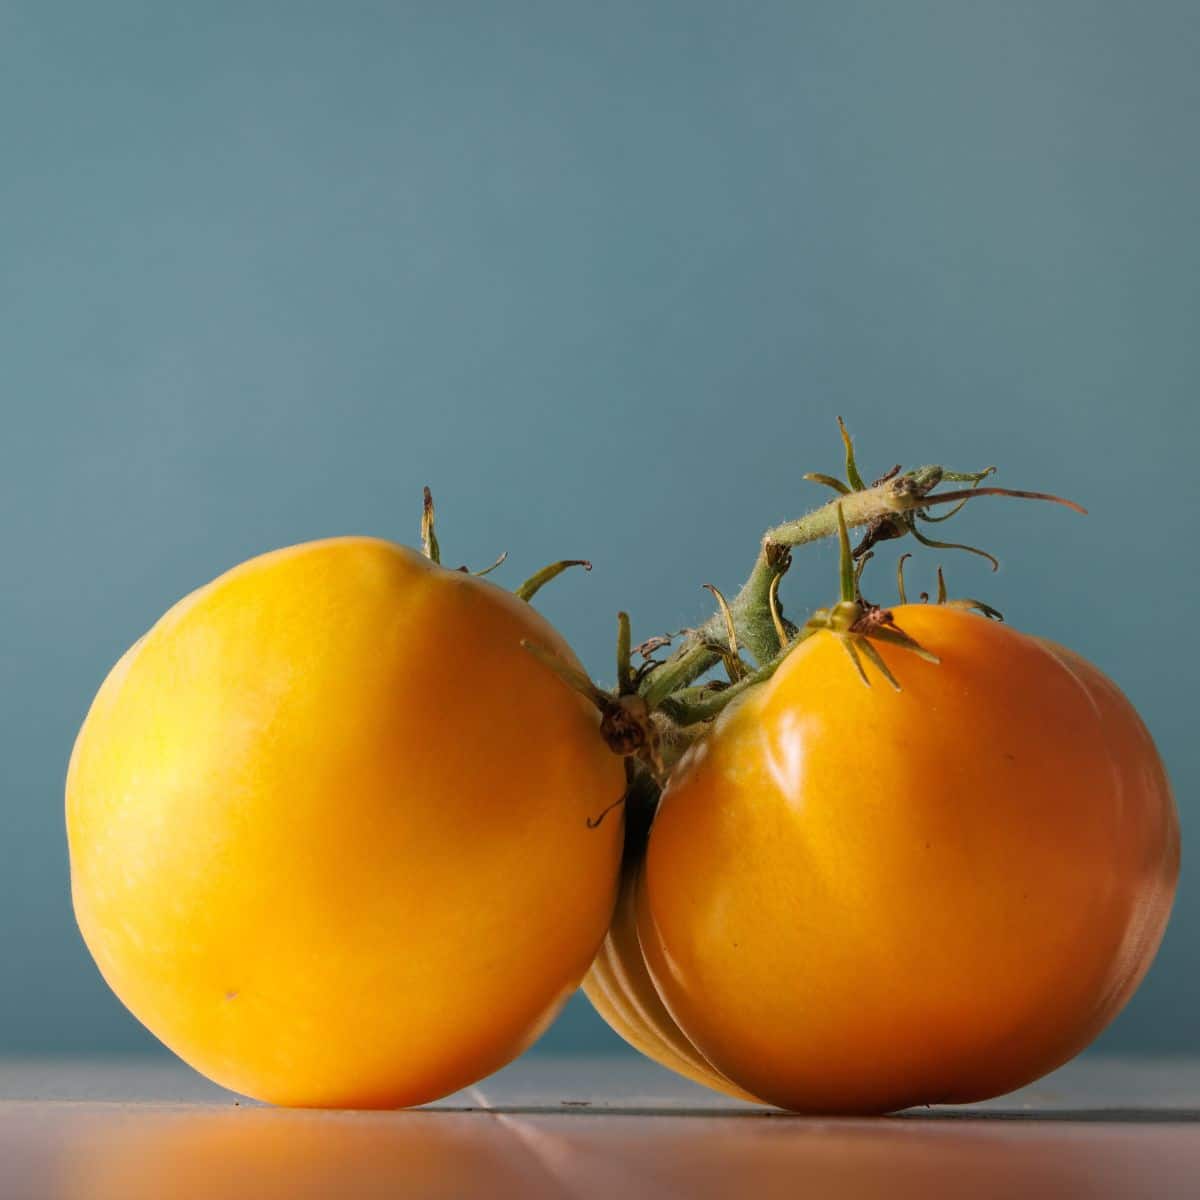 Two azoychka tomatoes on a counter.